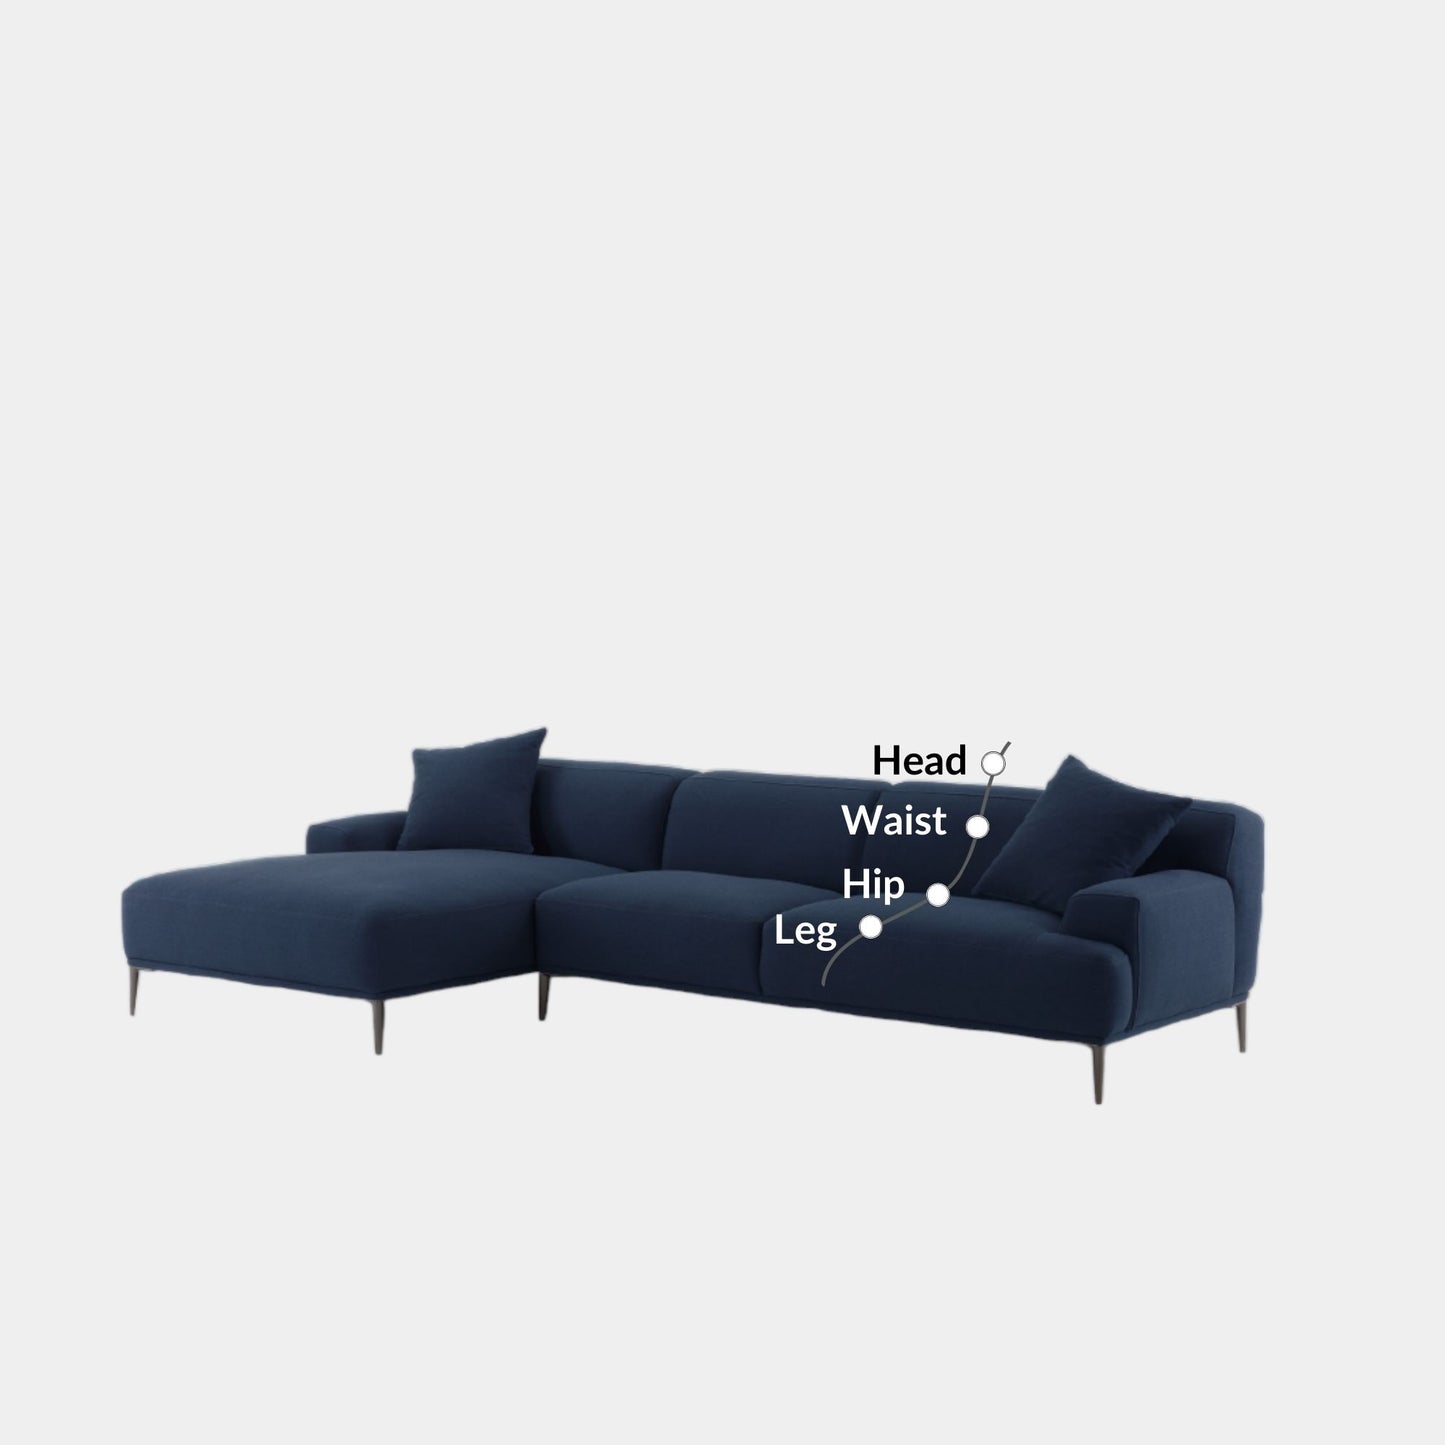 Crystal fabric sectional sofa large left blue